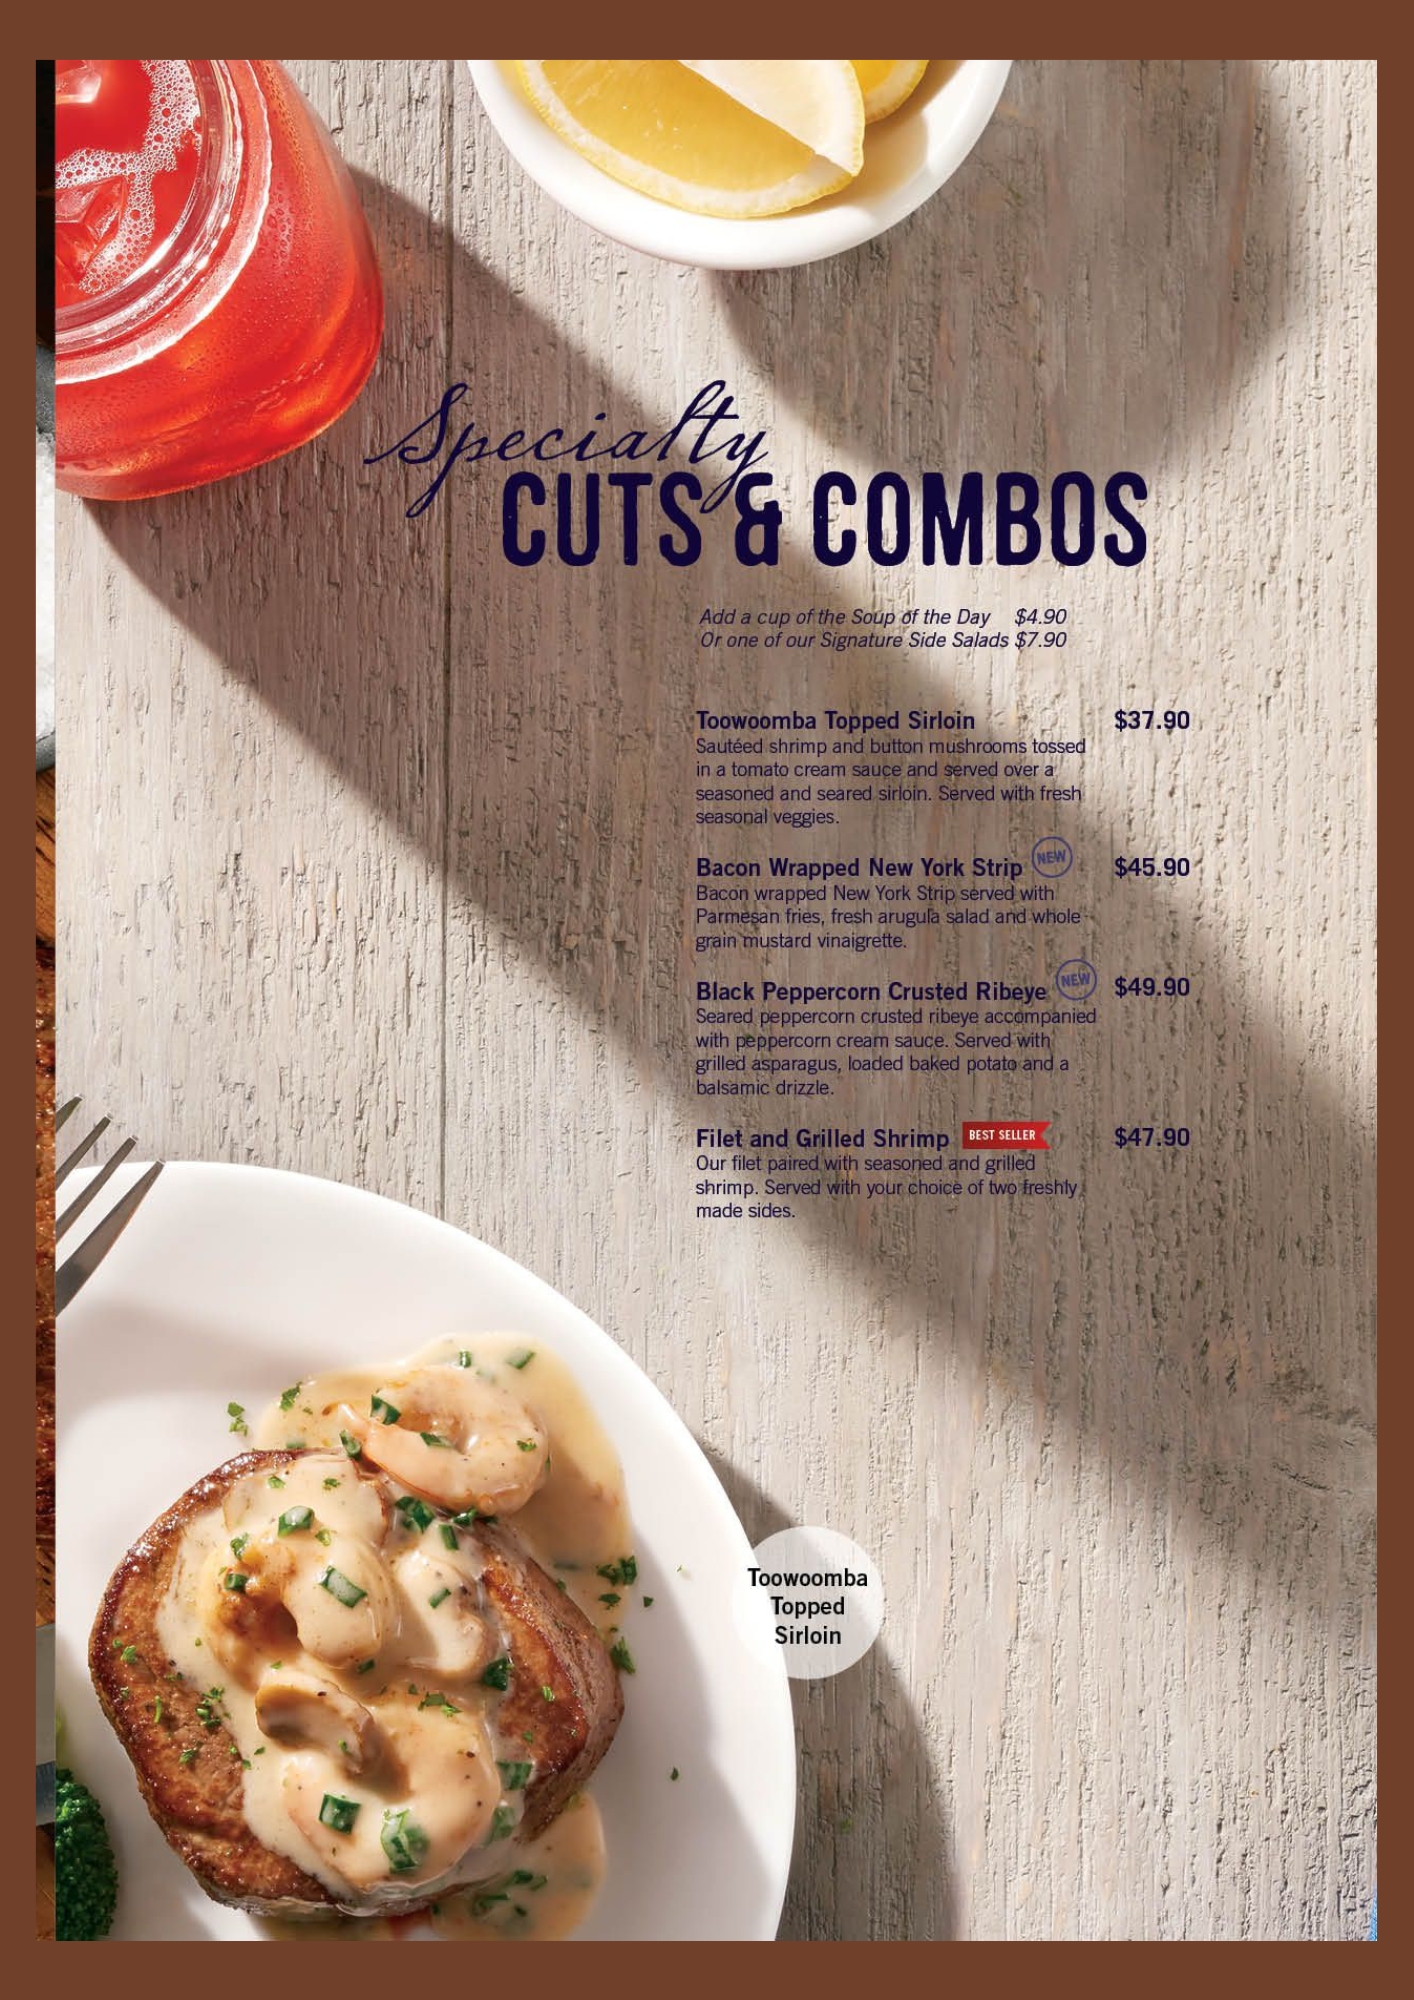 Outback Steakhouse Cuts and Combos